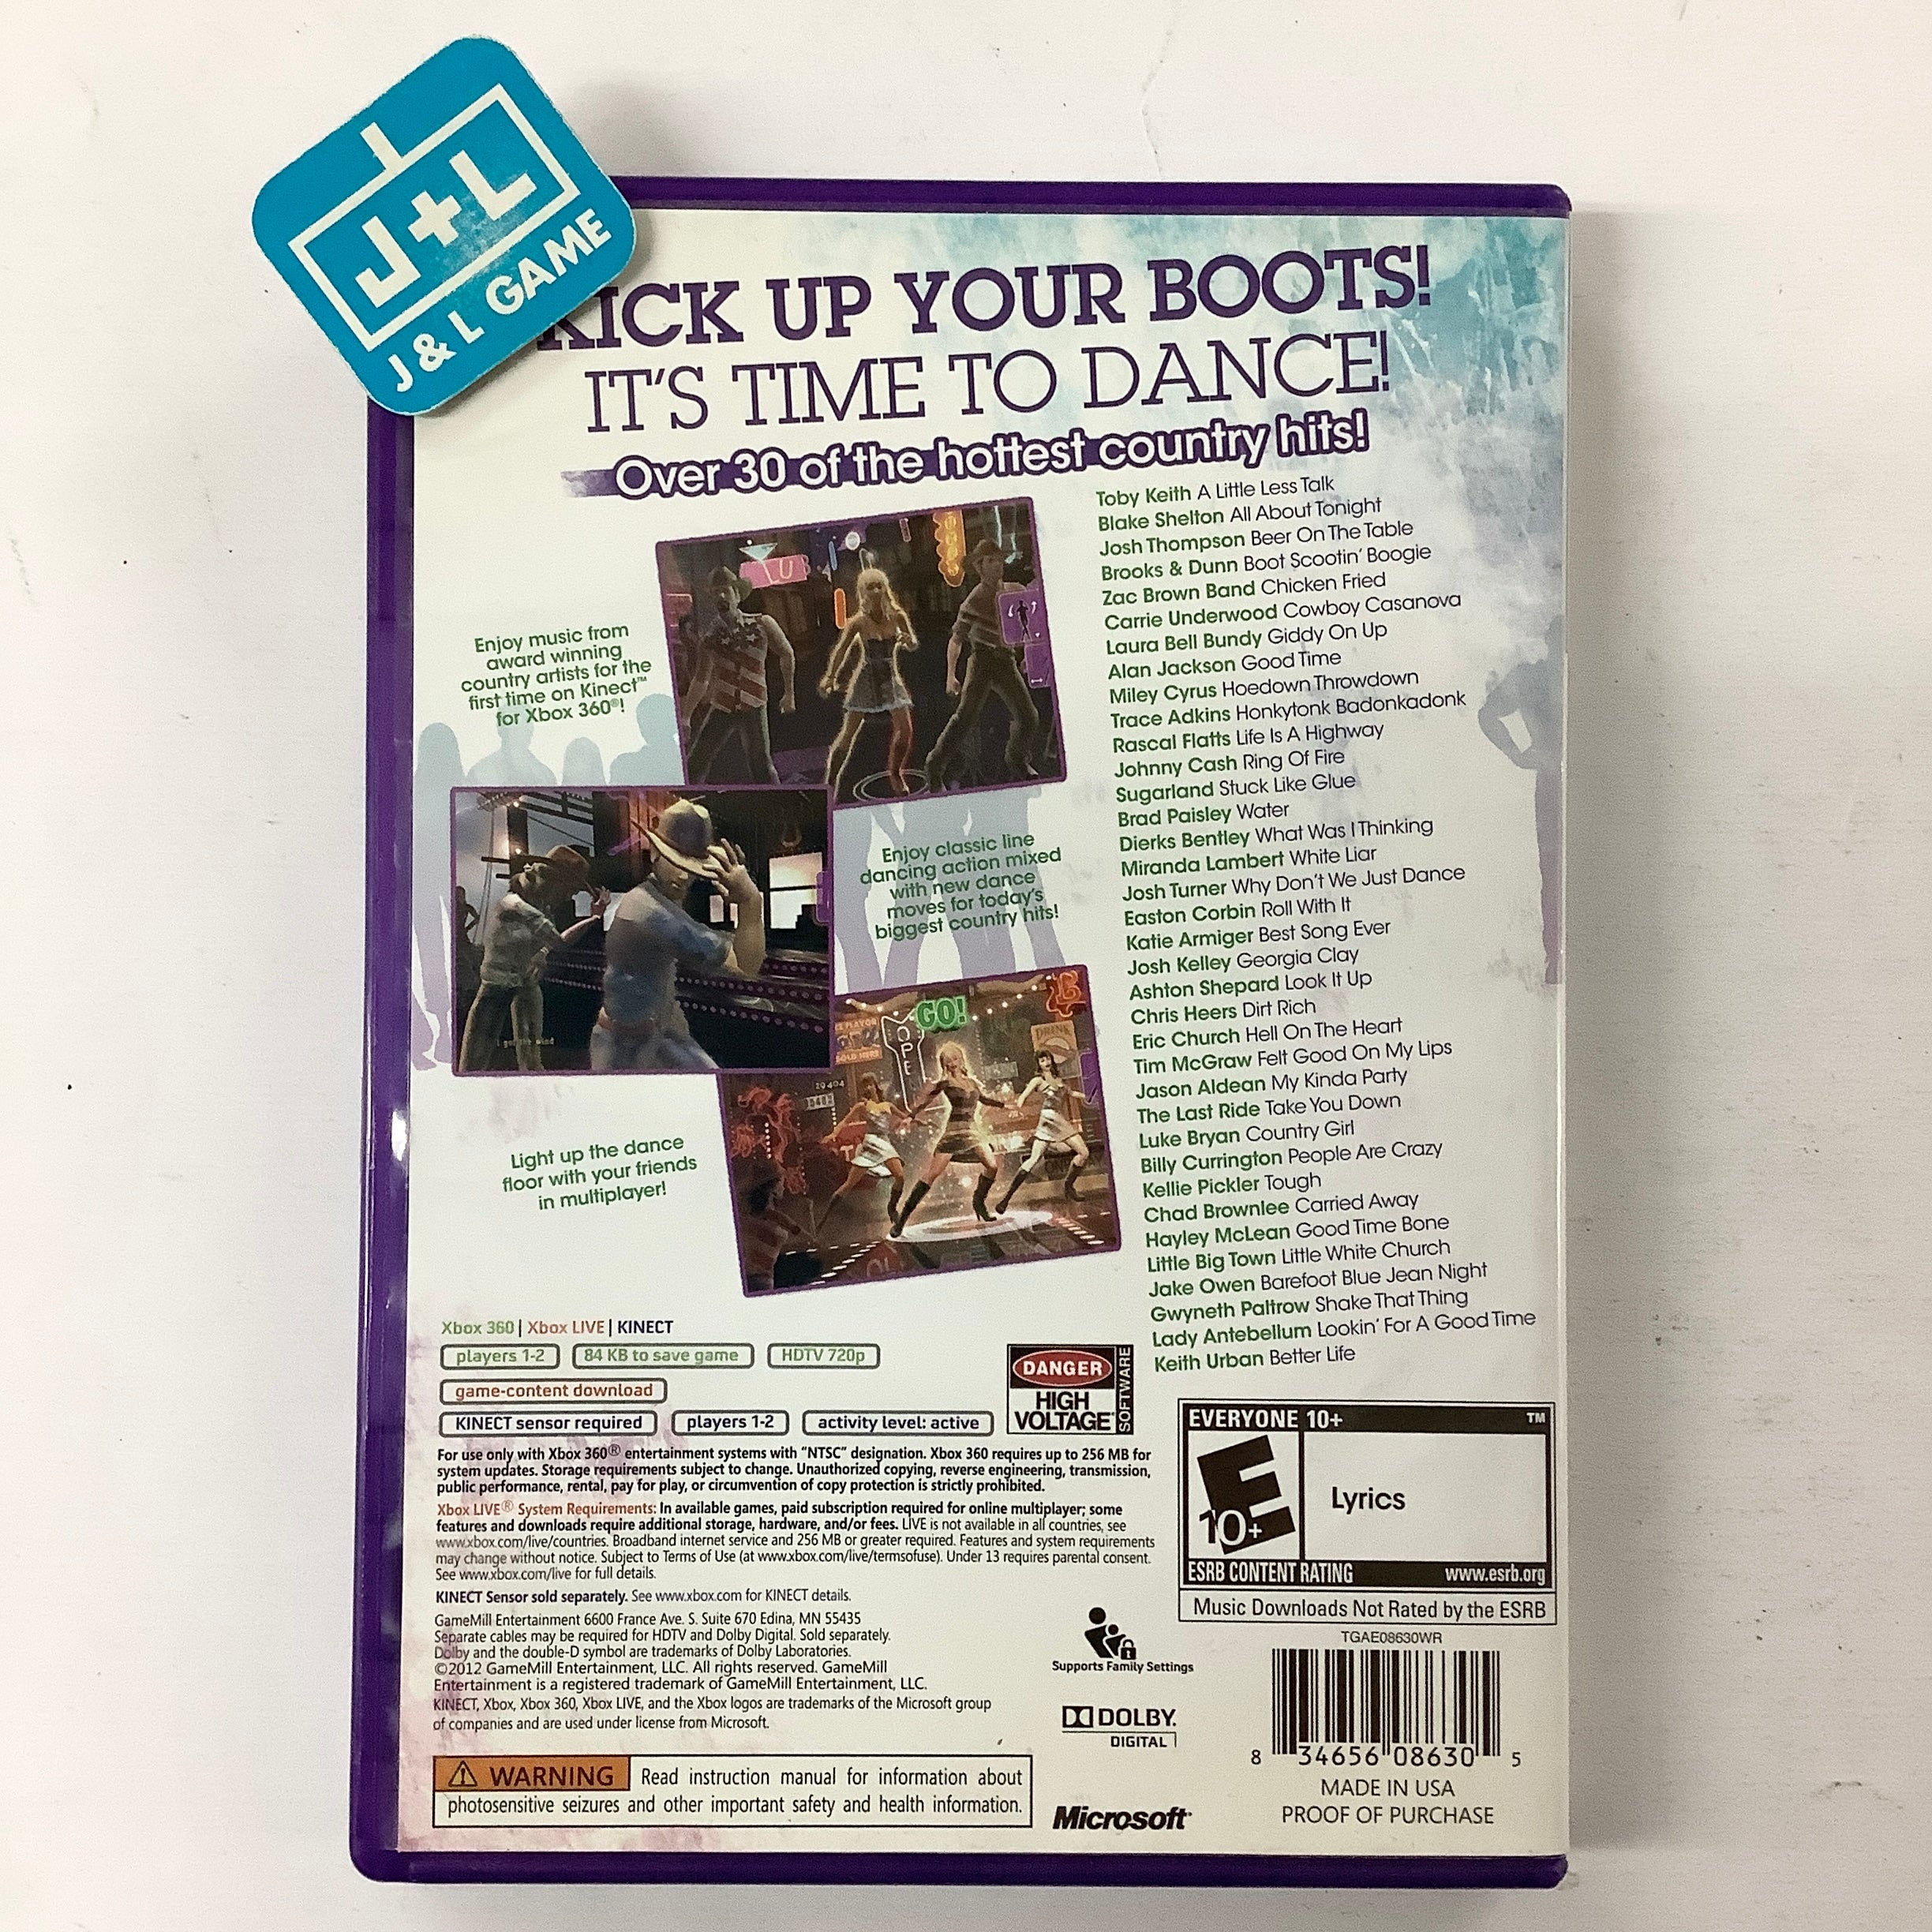 Country Dance All Stars (Kinect Required) - Xbox 360 [Pre-Owned] Video Games GameMill Publishing   